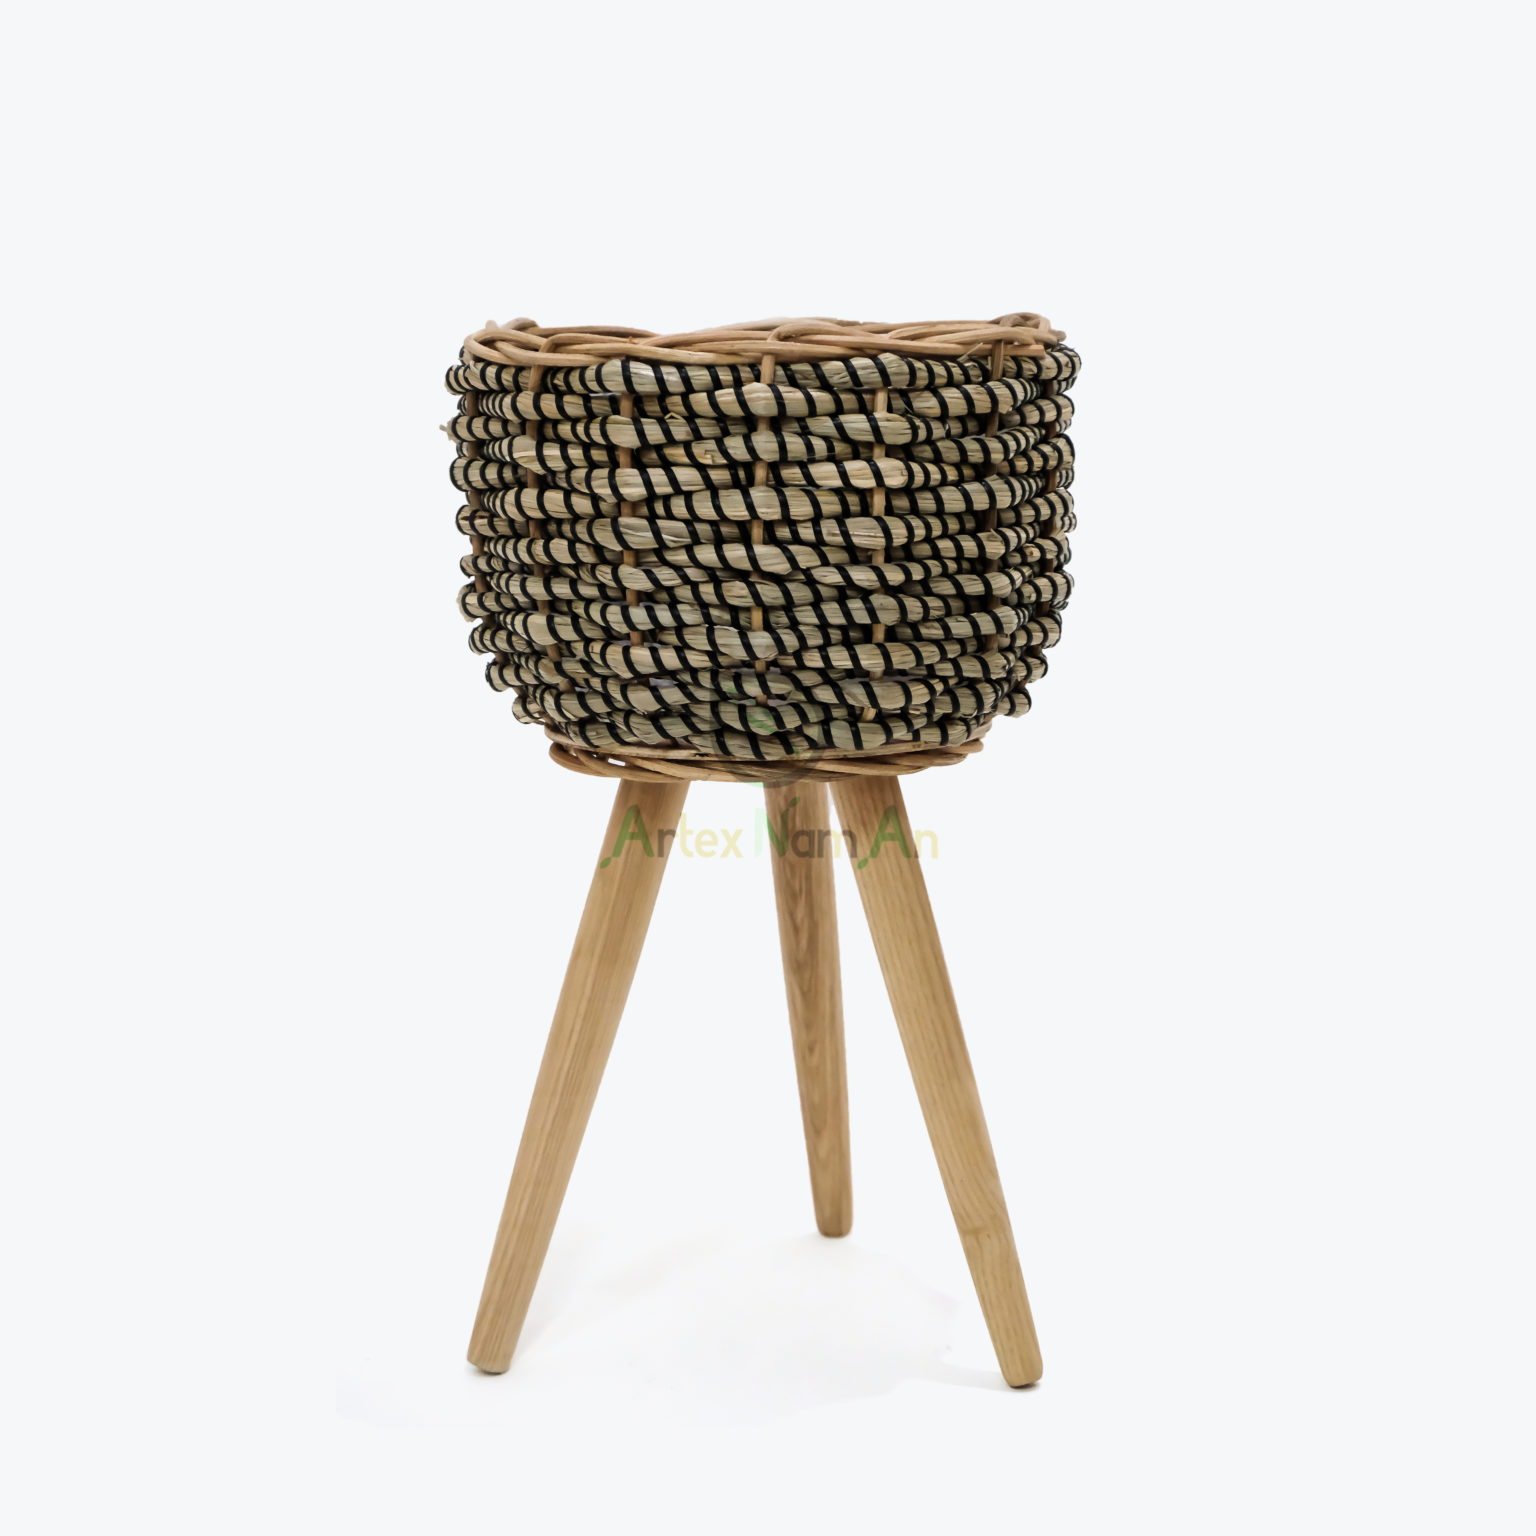 Seagrass Woven Indoor Plant Pot With Stand For Home Decor SG 09 16 115 01